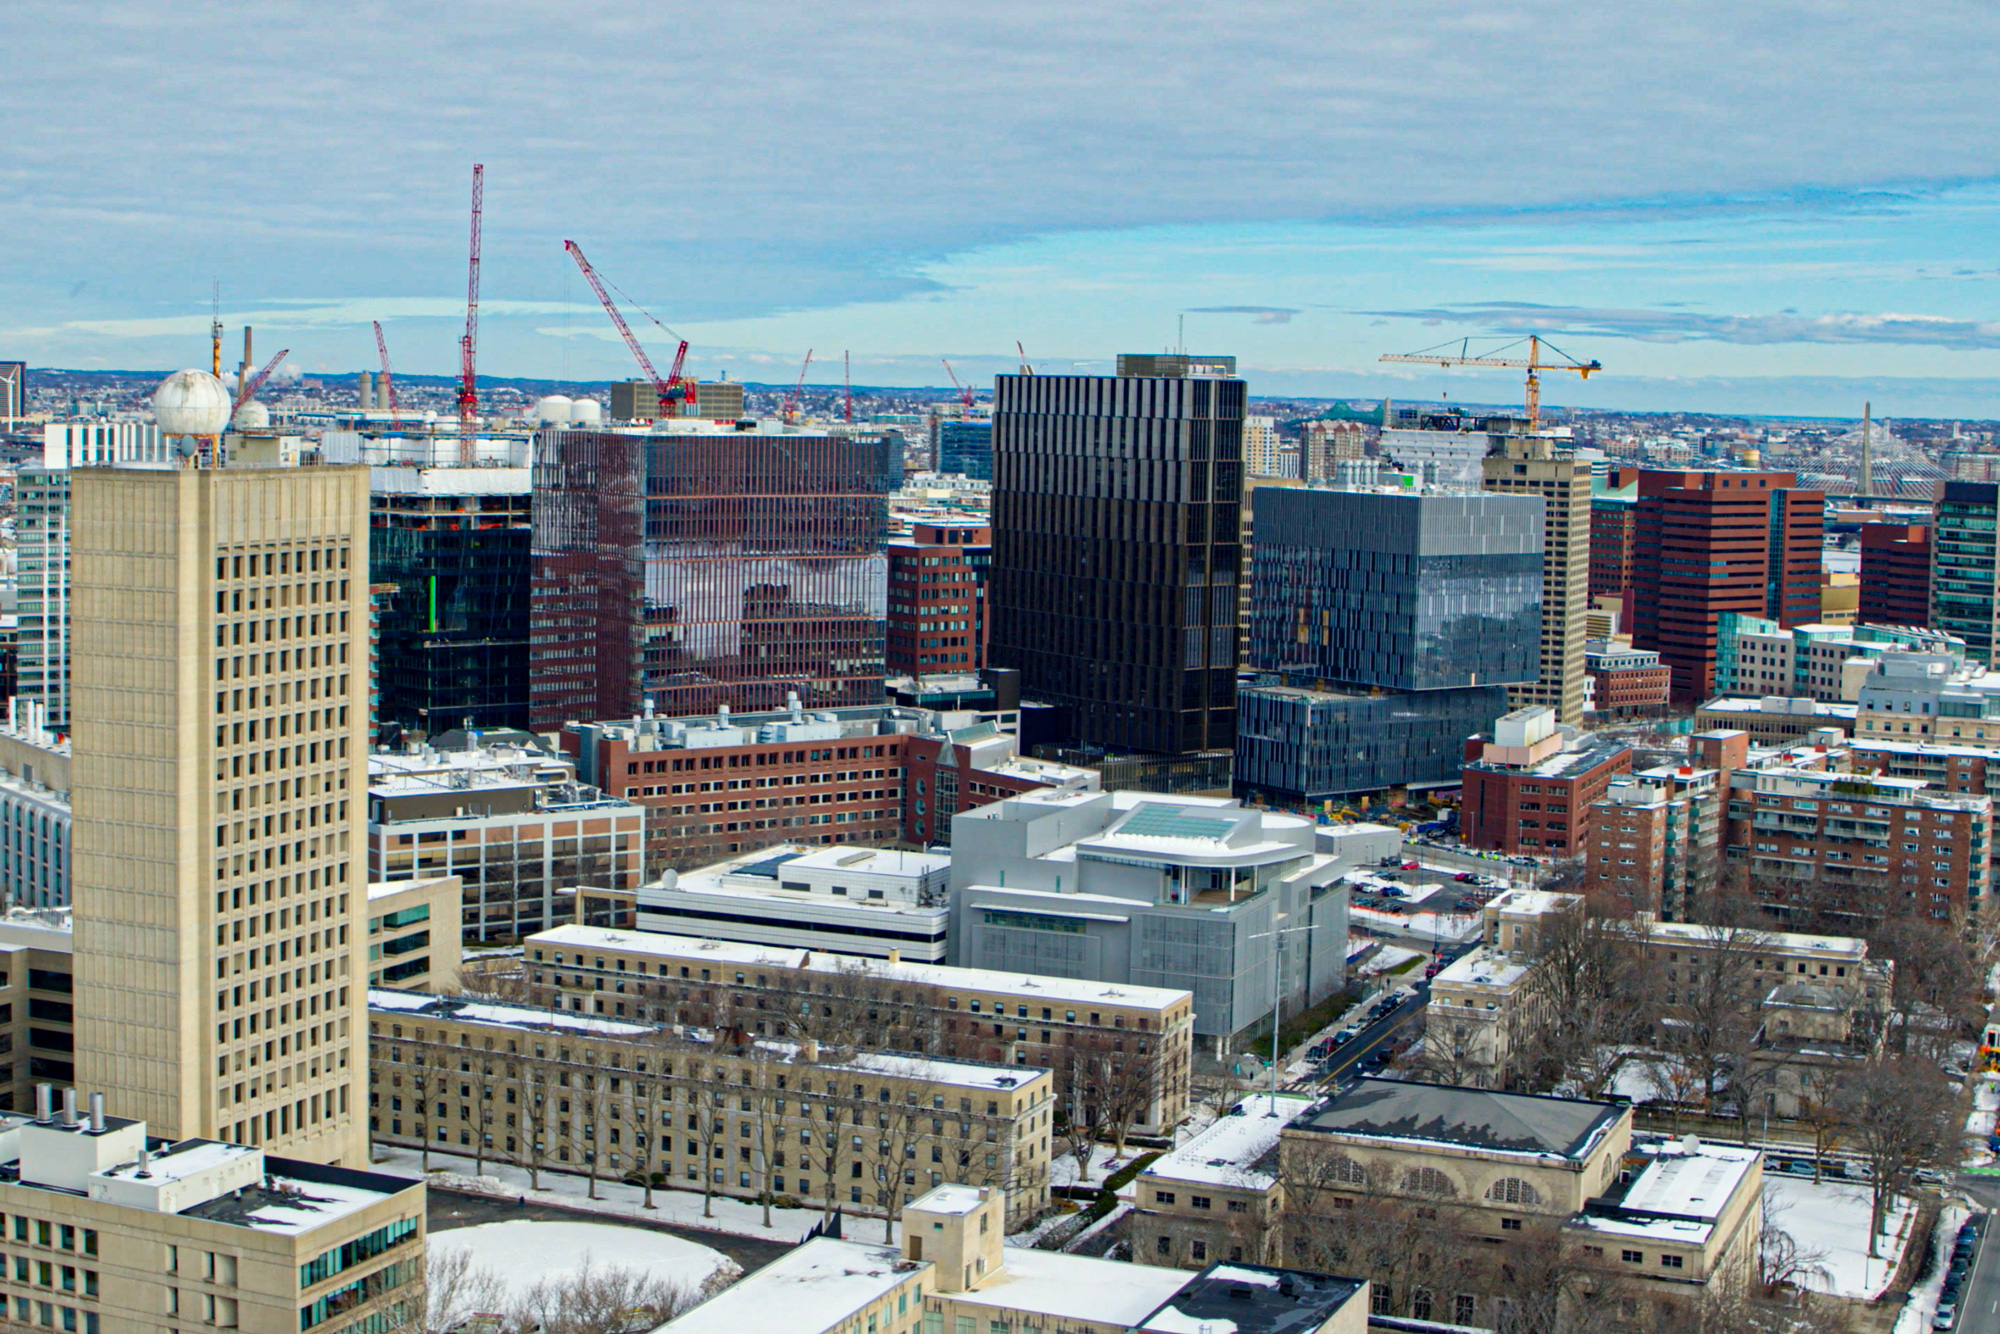 Annual KSA meeting envisions Kendall Square coming back “better than ever” | MIT News